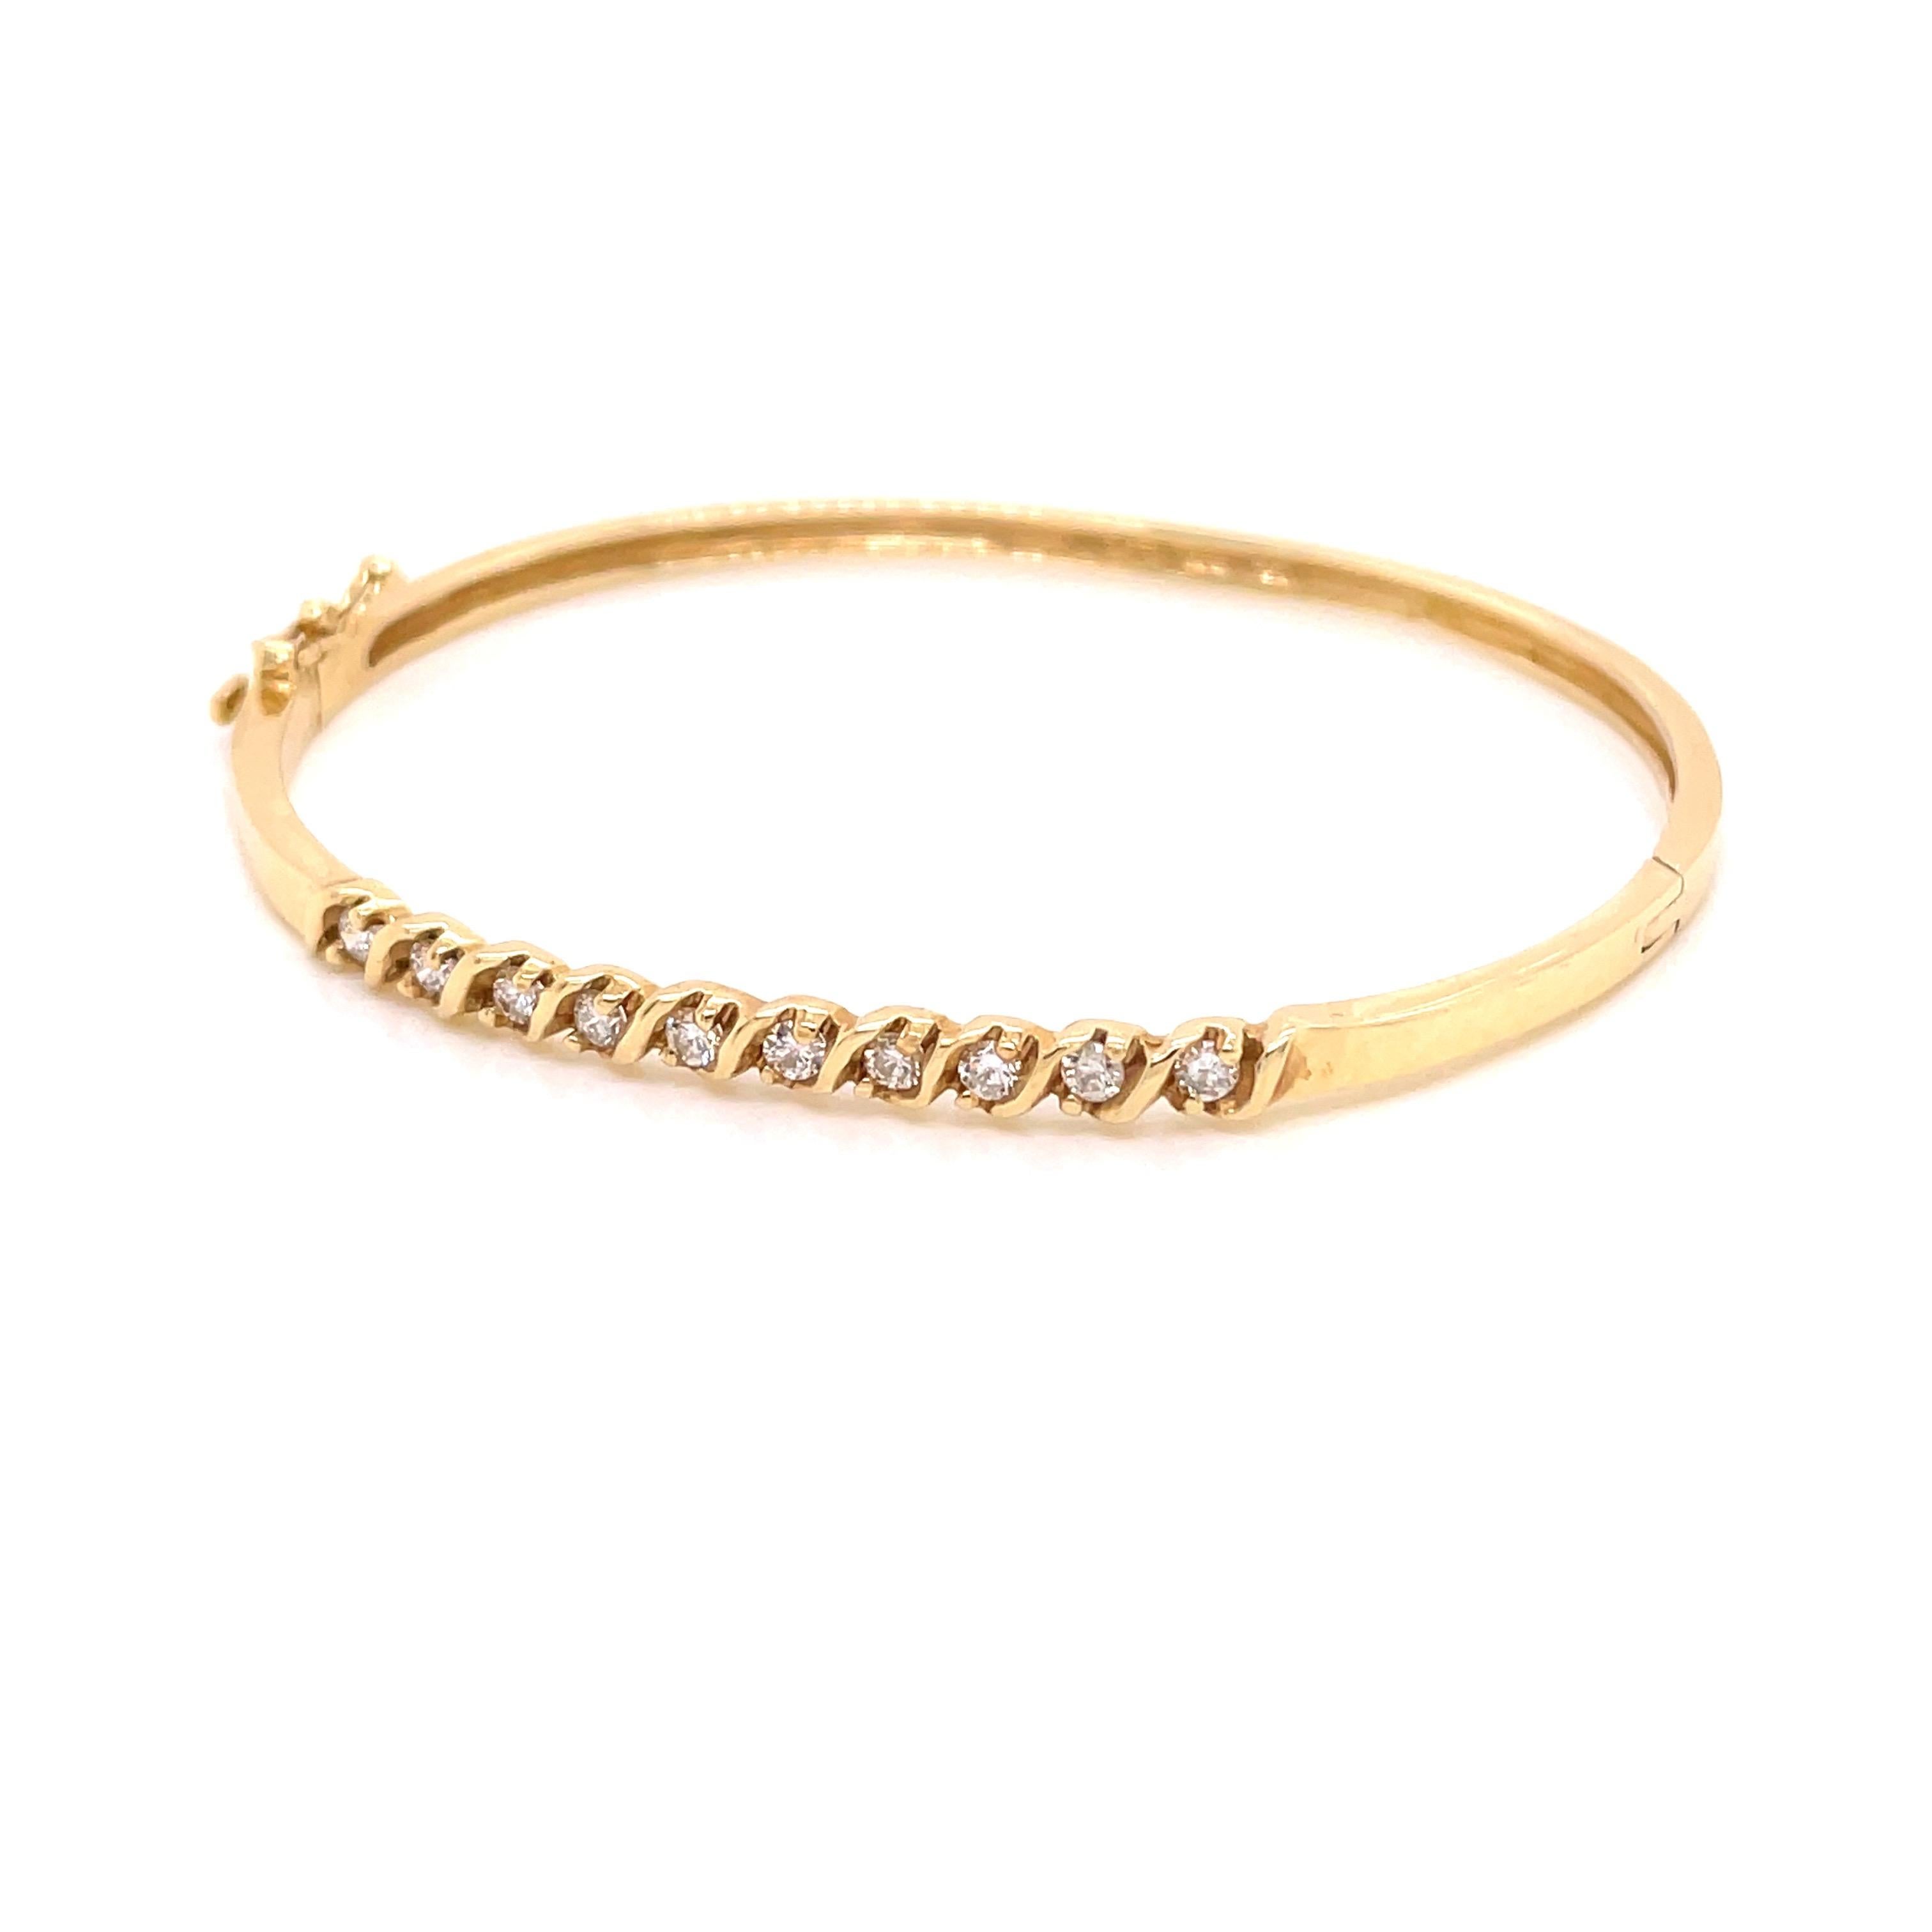 14K Yellow Gold Diamond Bangle Bracelet .47ct - The bangle is set with 10 round brilliant diamonds weighing .47ct with G - H color and VS2 - SI1 clarity with an 'S' bar design. The width of the bangle on top is 3mm and tapers to 2.7mm on the bottom.